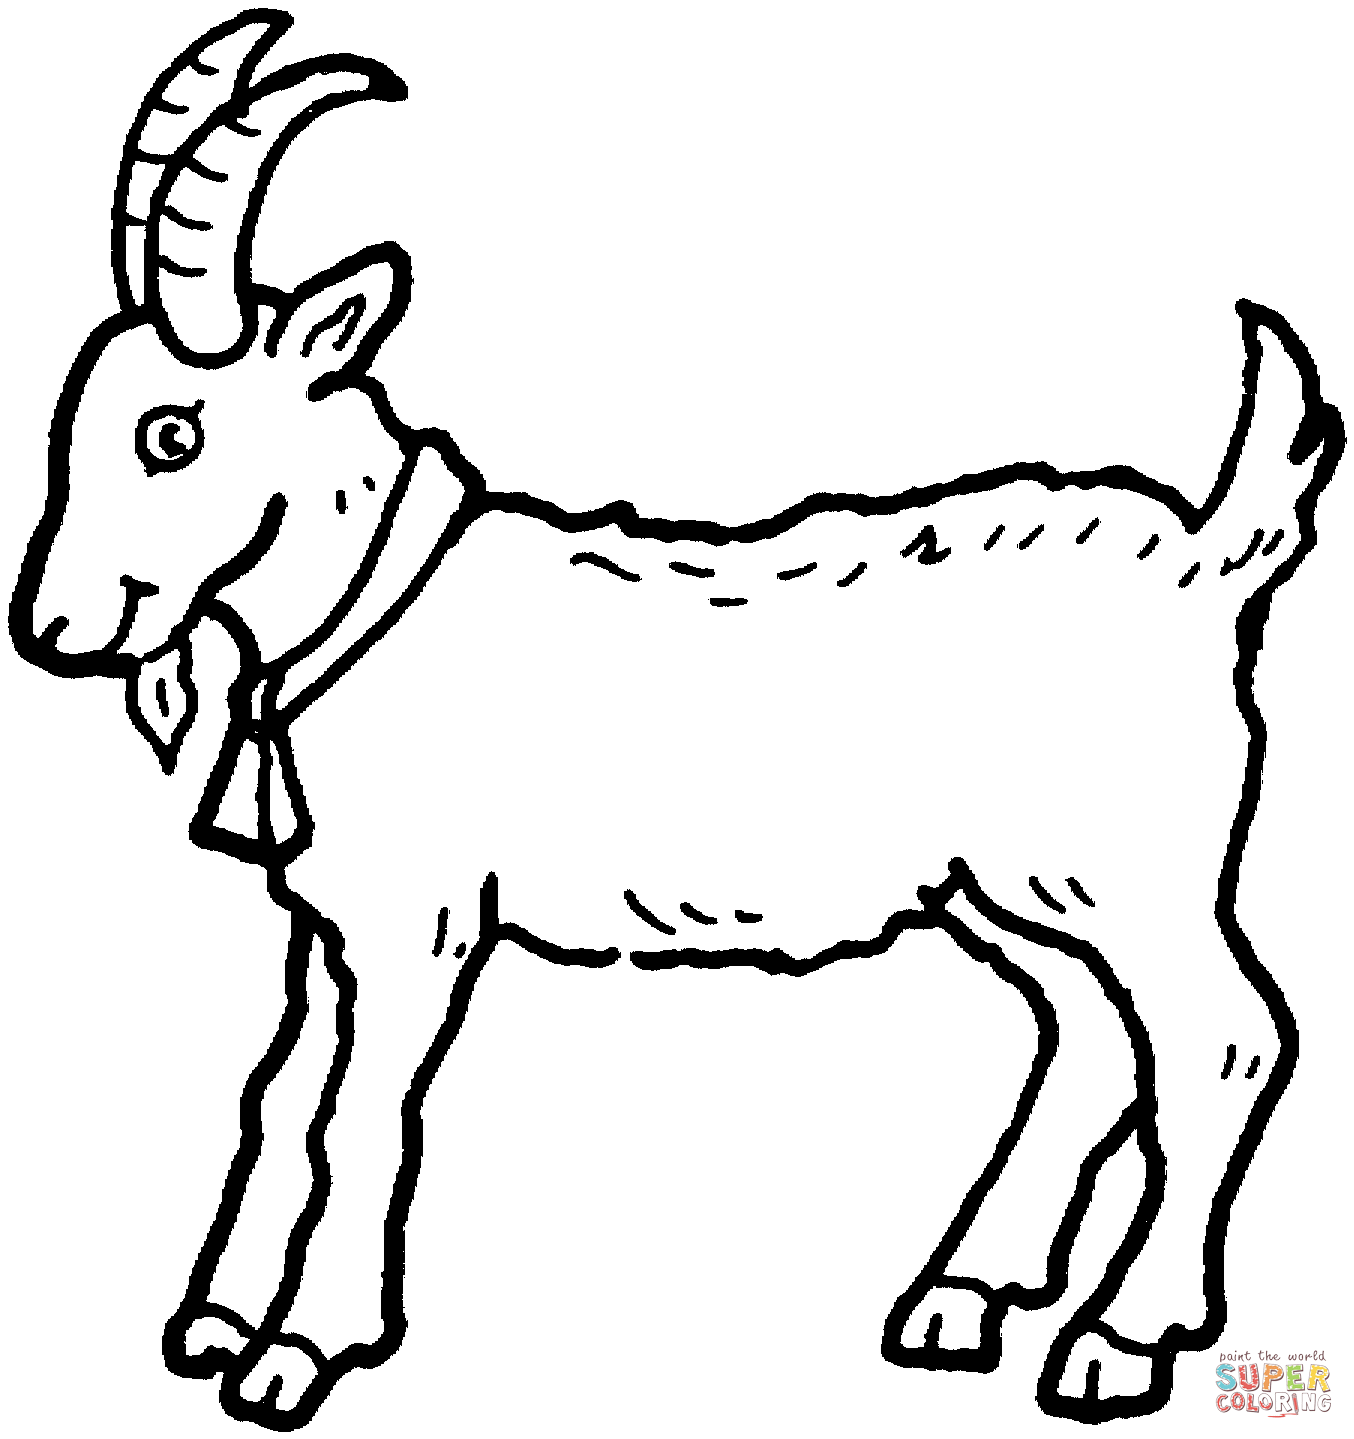 Cartoon Goats Coloring Pages - Coloring Pages For All Ages